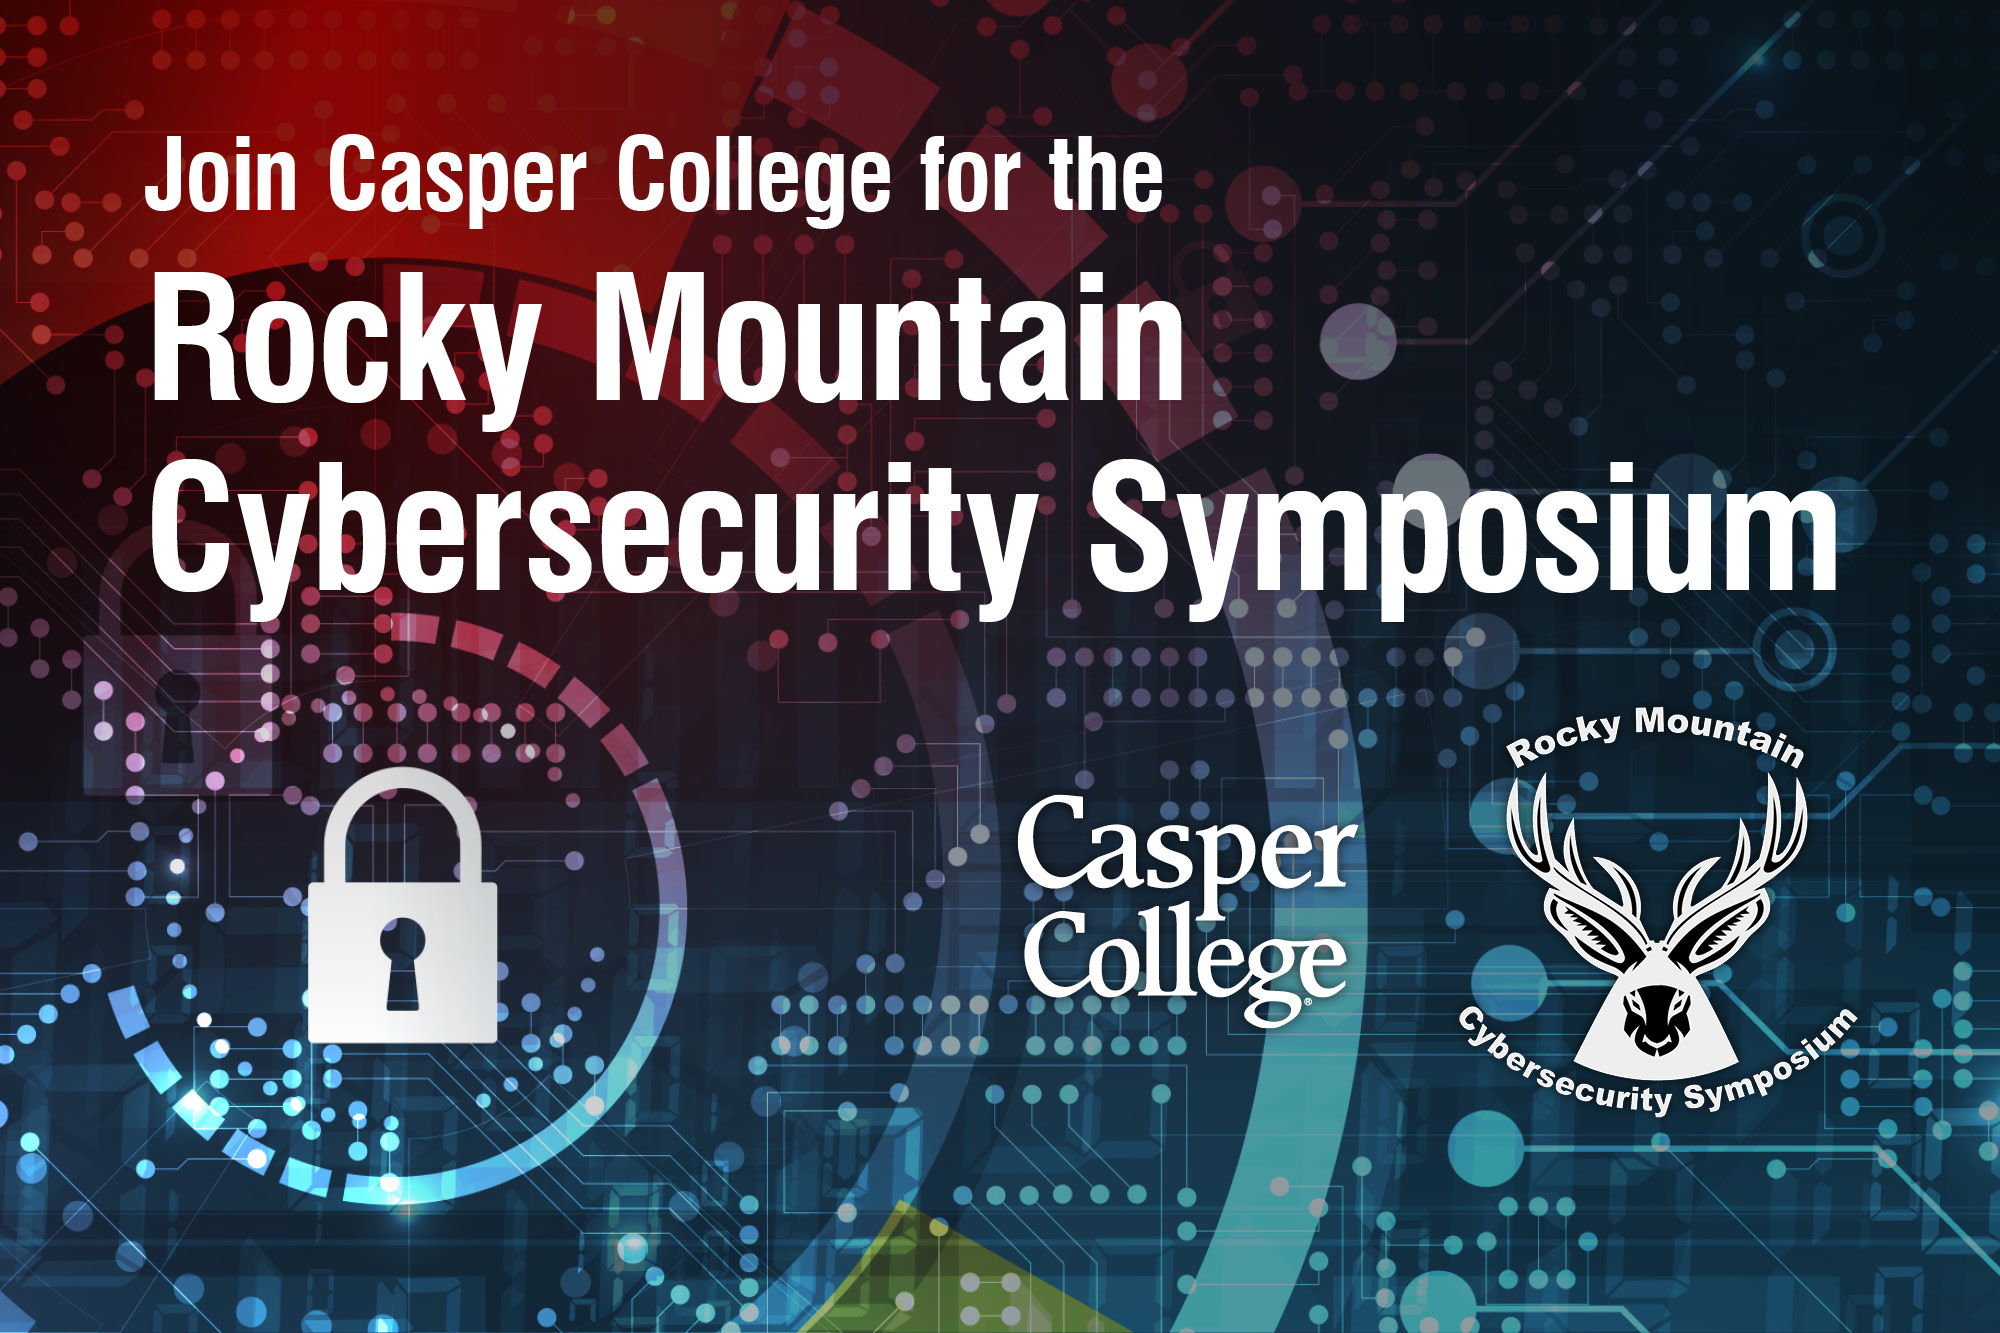 Image for Cybersecurity Symposium press release.